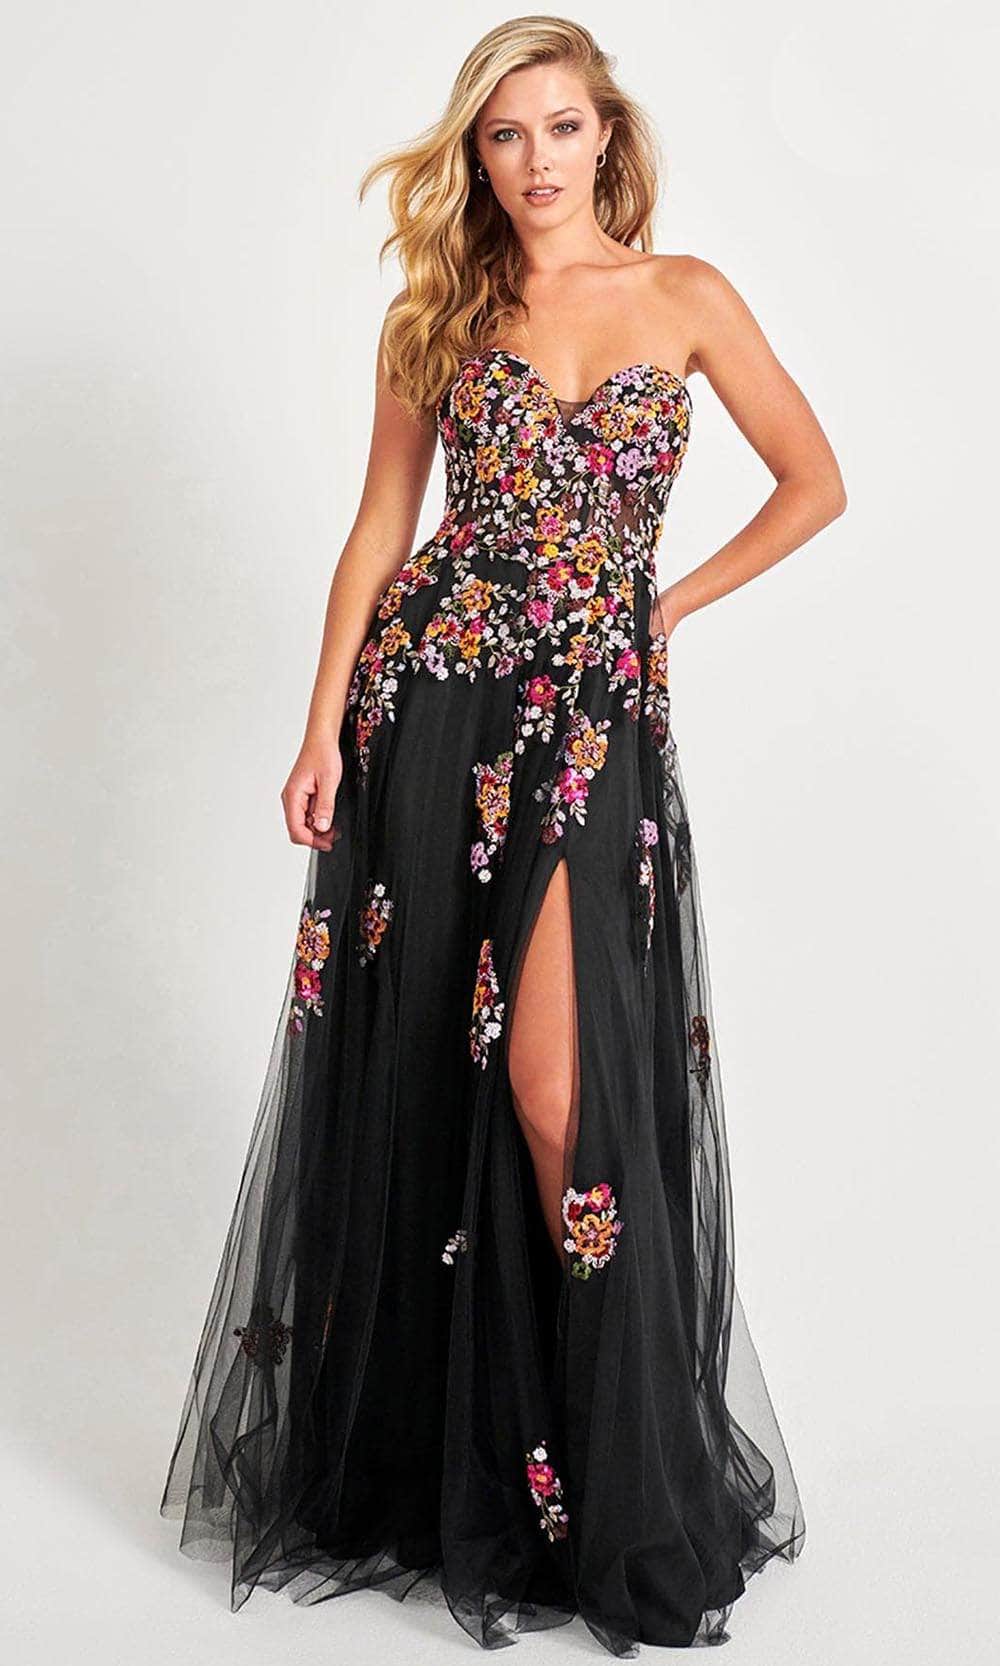 Image of Faviana 11028 - Strapless Floral Appliqued Prom Modest Prom Gown